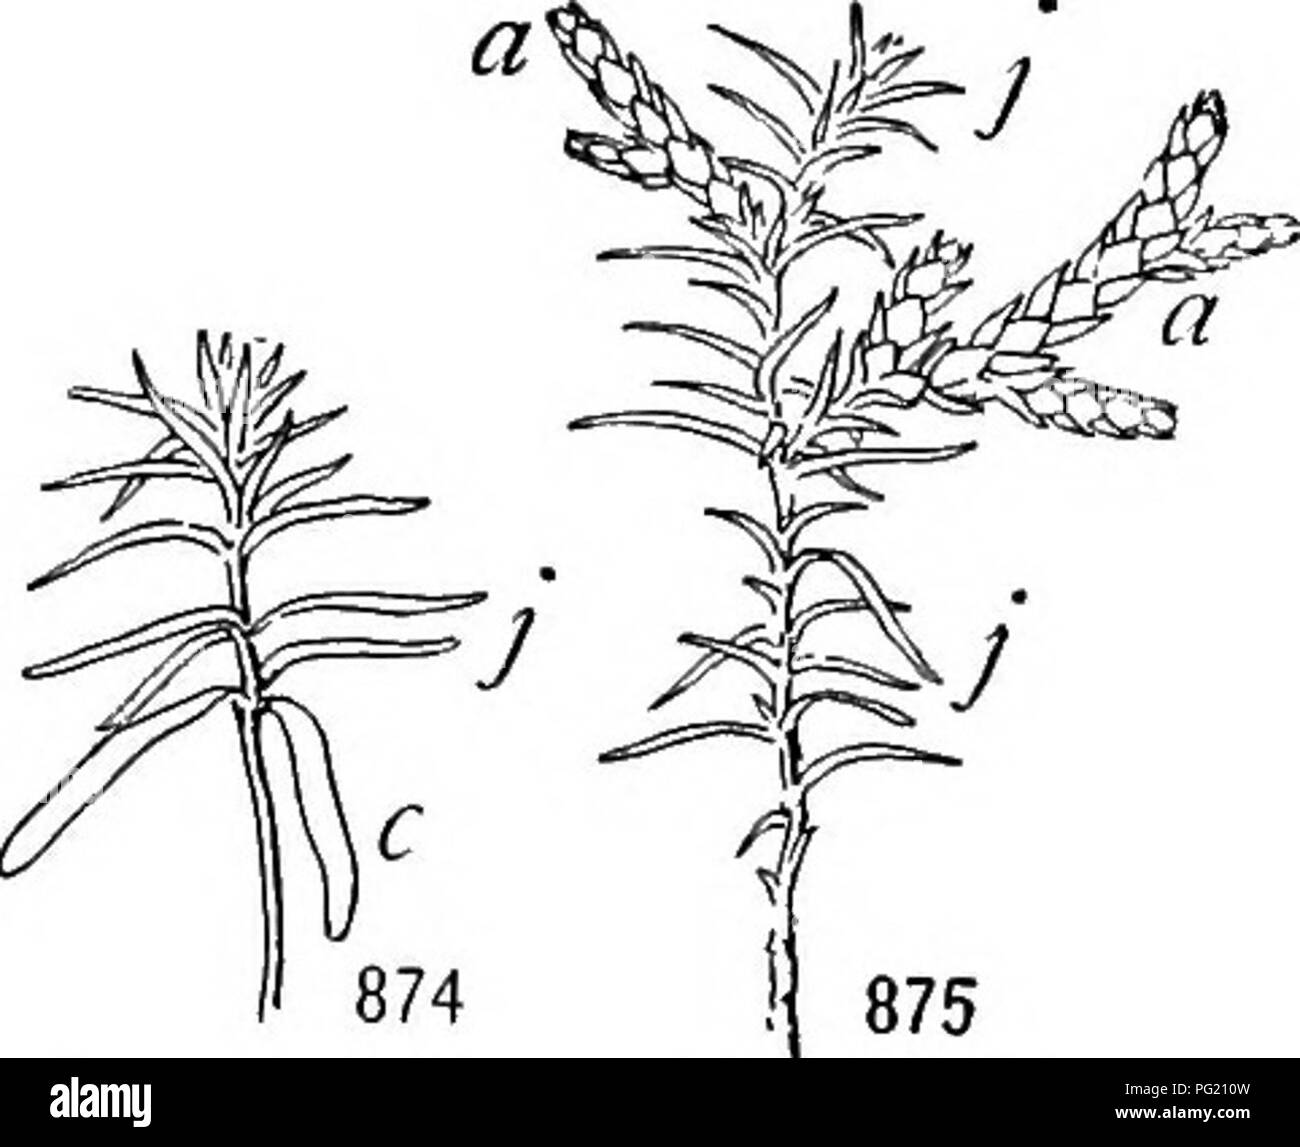 . A textbook of botany for colleges and universities ... Botany. Fig. 873. — Leaf variation in the hare- bell {Campdnula rotundifolia); the apex of the shoot has been cut off, and lateral buds have developed at b and b' note that the first leaves of the axillary rosettes are short and roundish, as in seedlings and basal rosettes; such an occurrence sometimes is called a reversion to a juvenile stage. — From Familler.. Figs. 874,873. — Leaf variation in the arbor vitae (Thuja occidentals); 874, a seedling, showing the cotyledons (c) and the awl-shaped &quot; juvenile &quot; leaves (/); 875, an Stock Photo